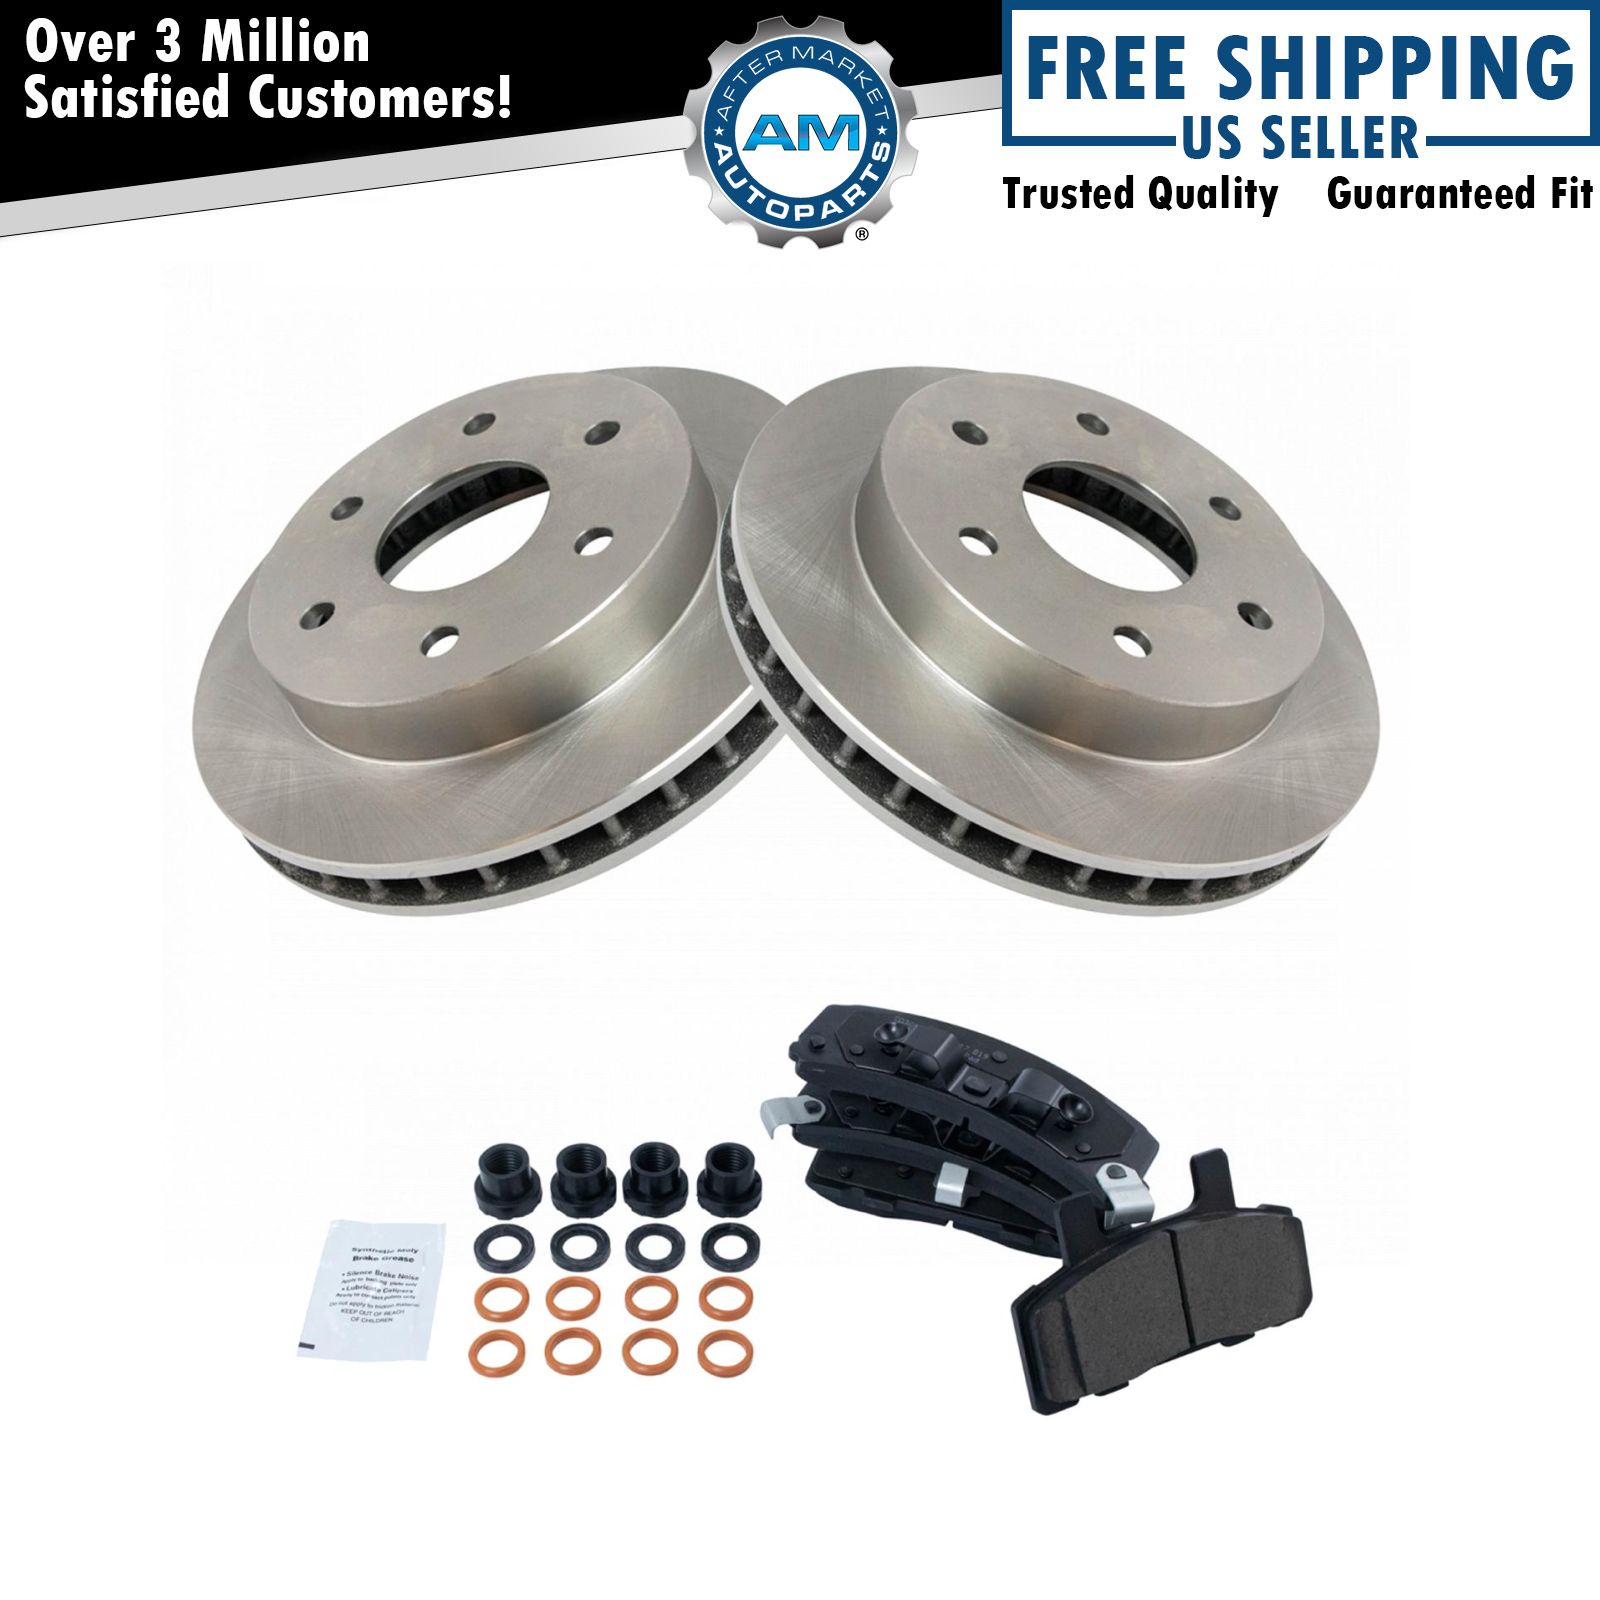 Front Disc Ceramic Brake Pads & Rotors Kit for Chevy GMC Pickup Truck